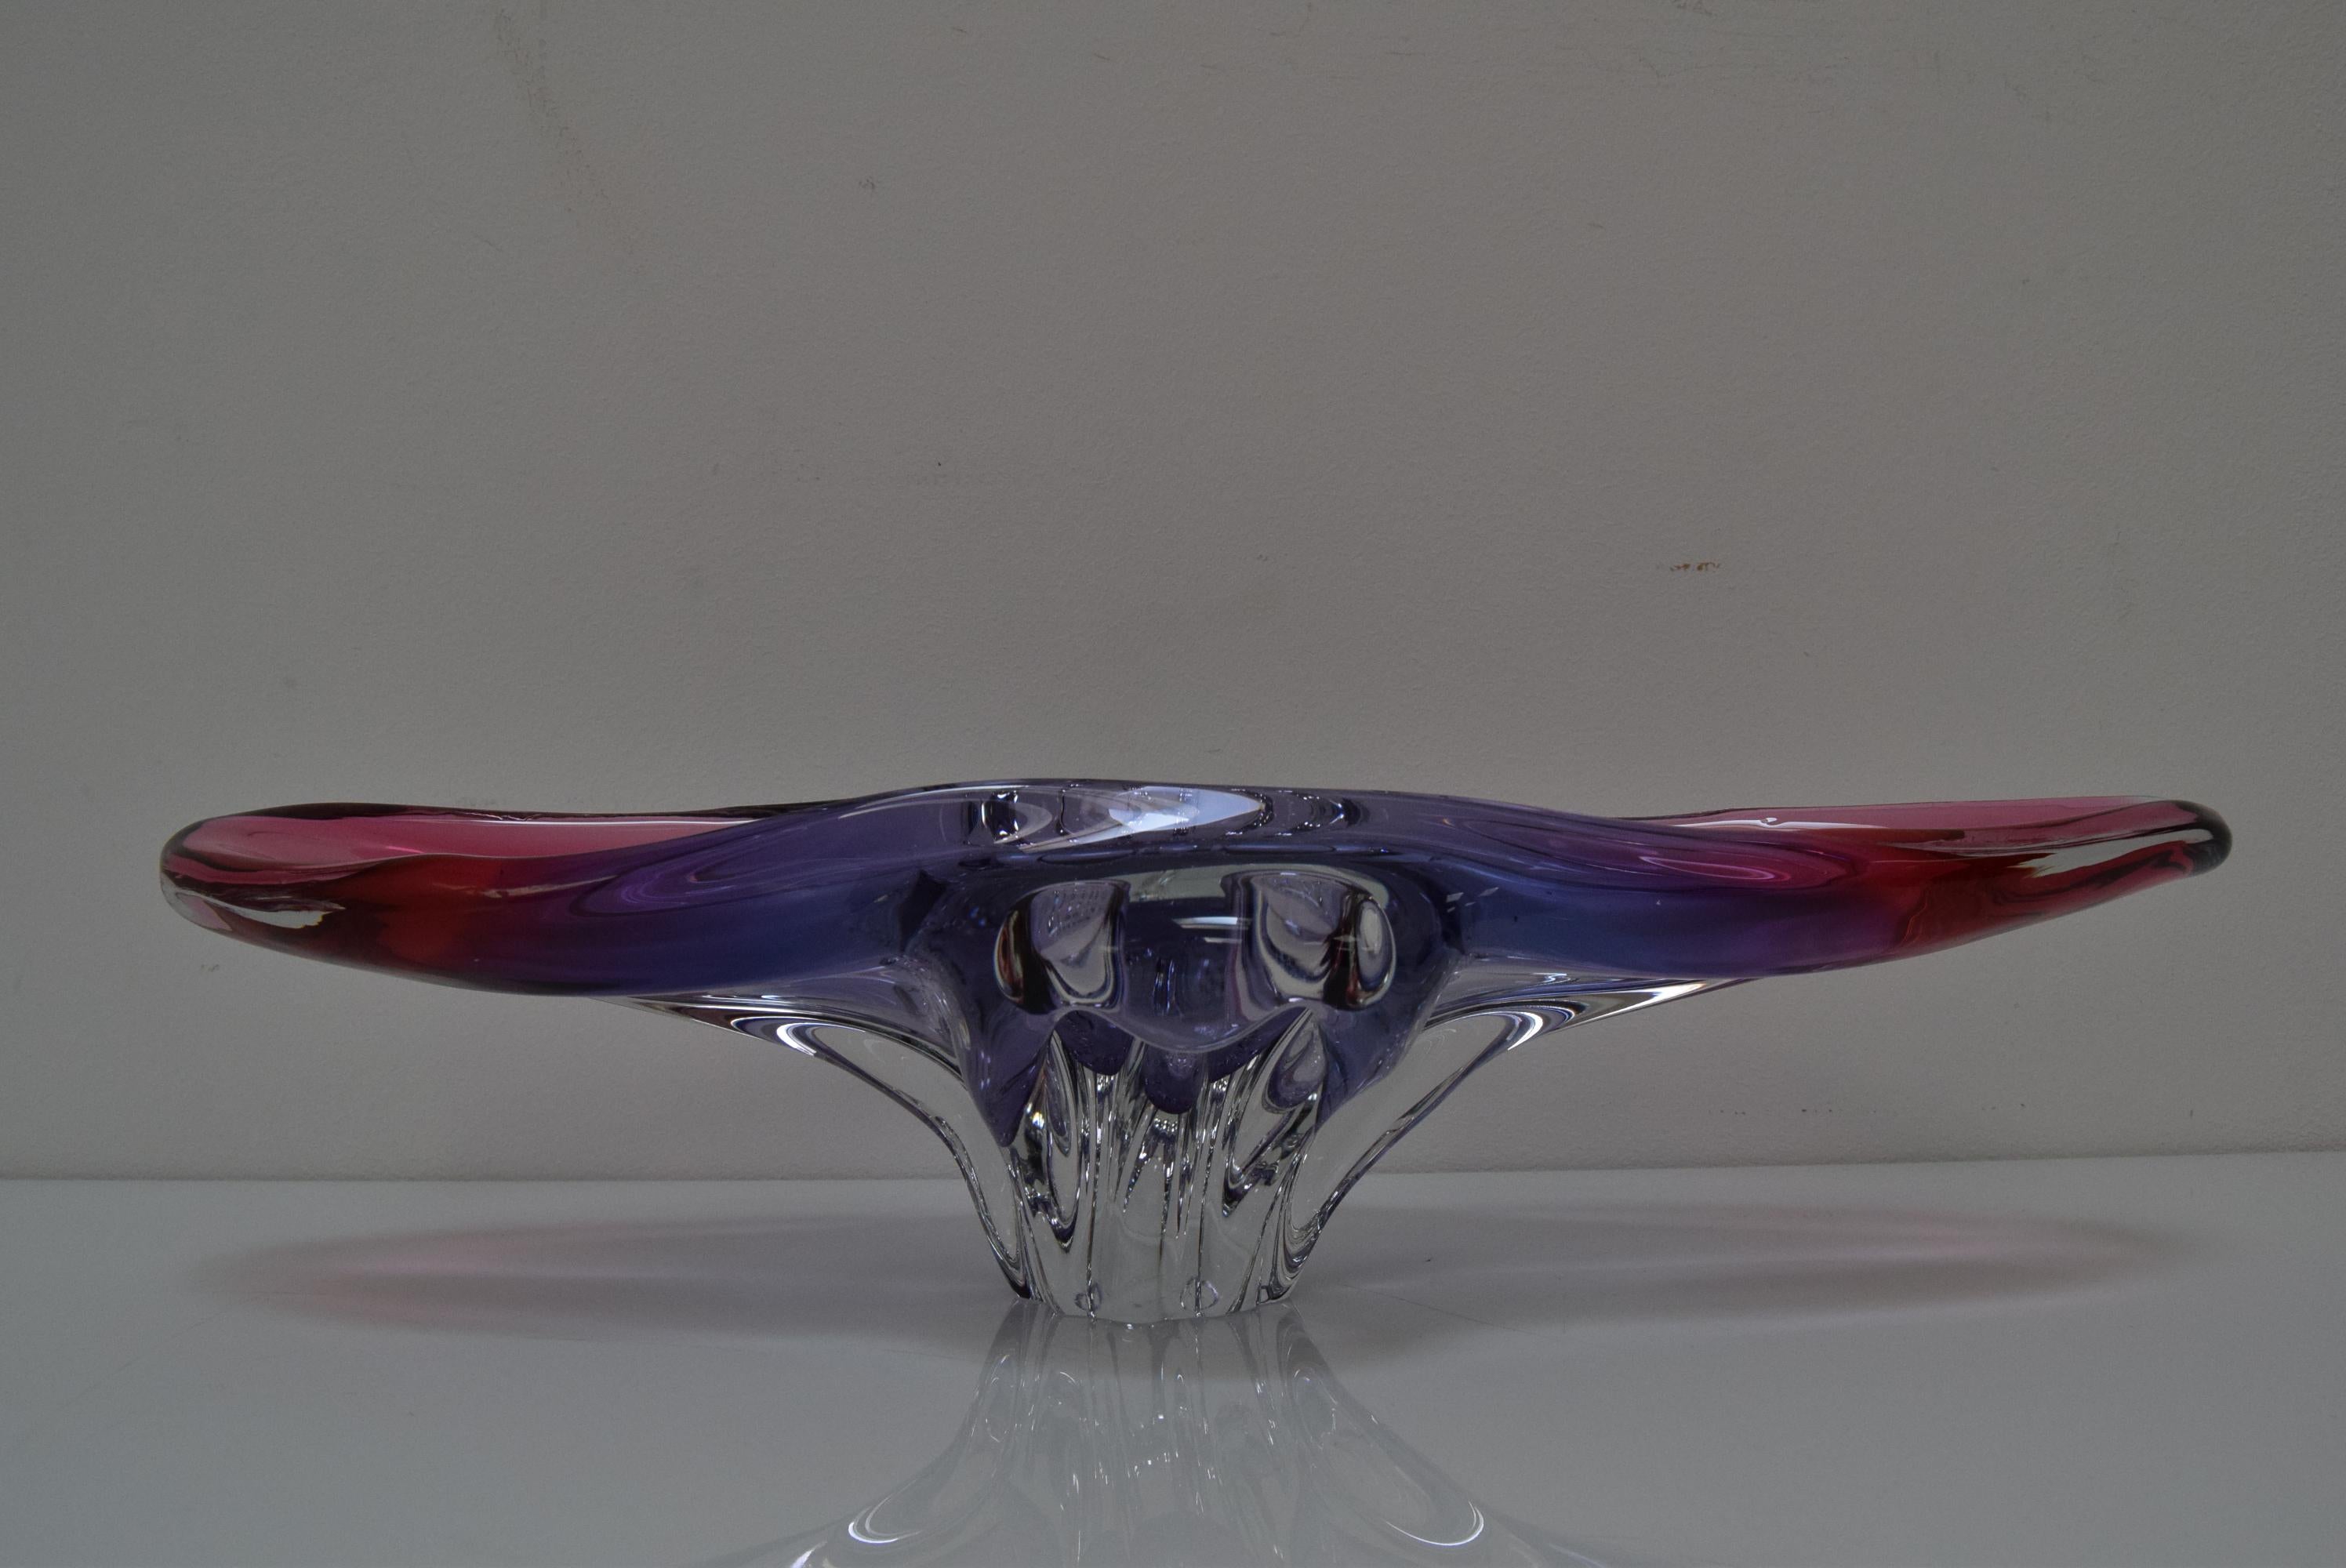 
Made in Czechoslovakia
Made of Art Glass
Re-polished
Good Original condition.